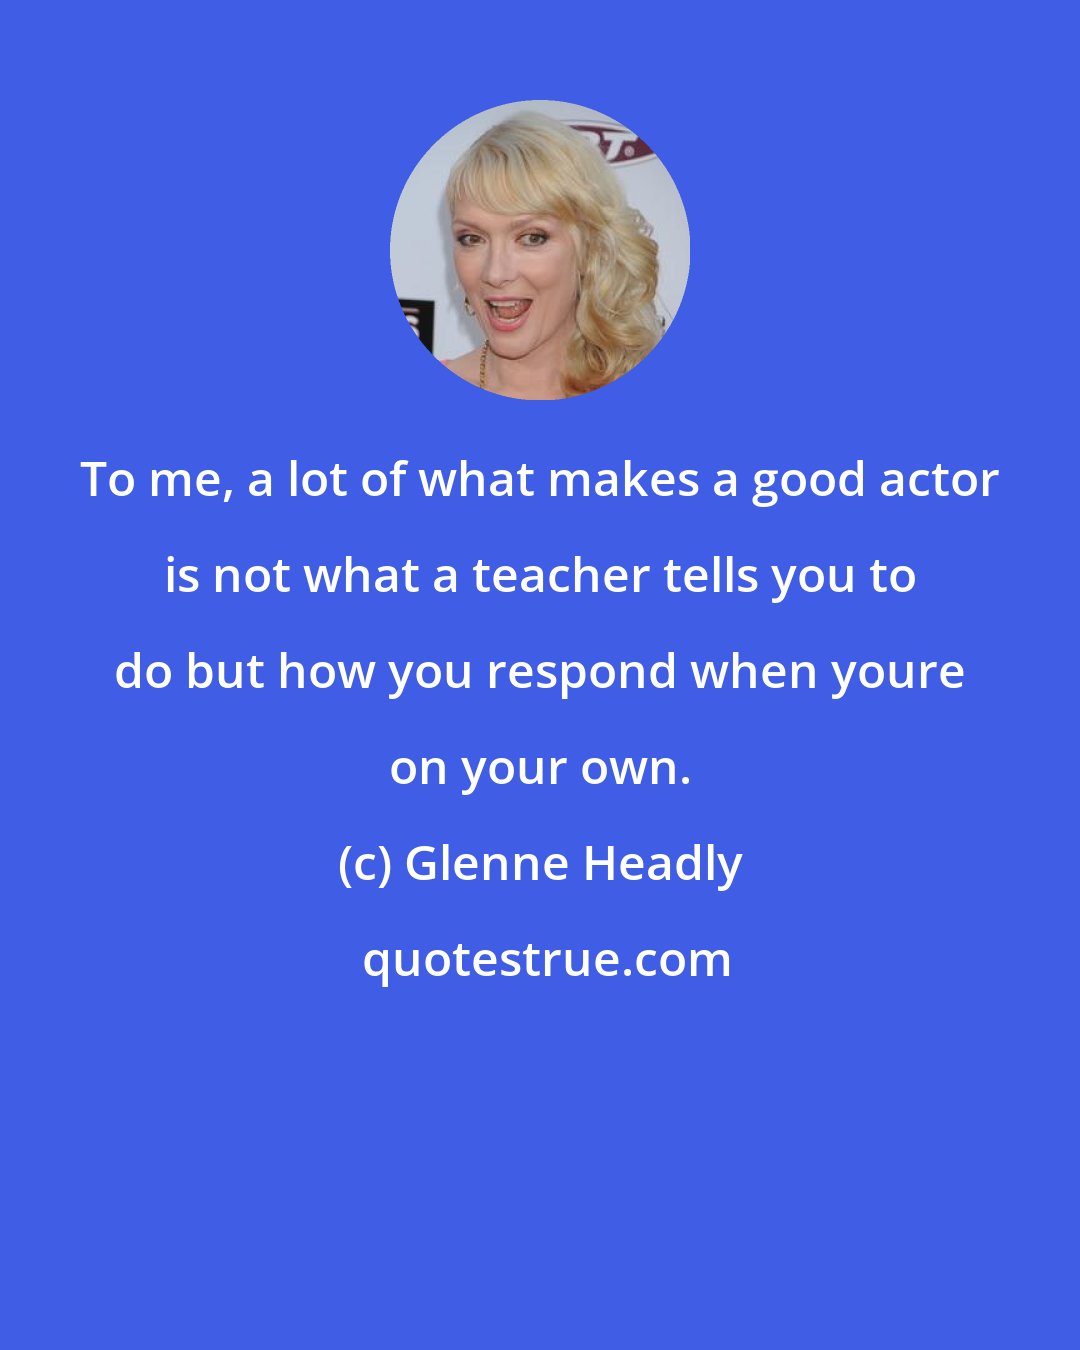 Glenne Headly: To me, a lot of what makes a good actor is not what a teacher tells you to do but how you respond when youre on your own.